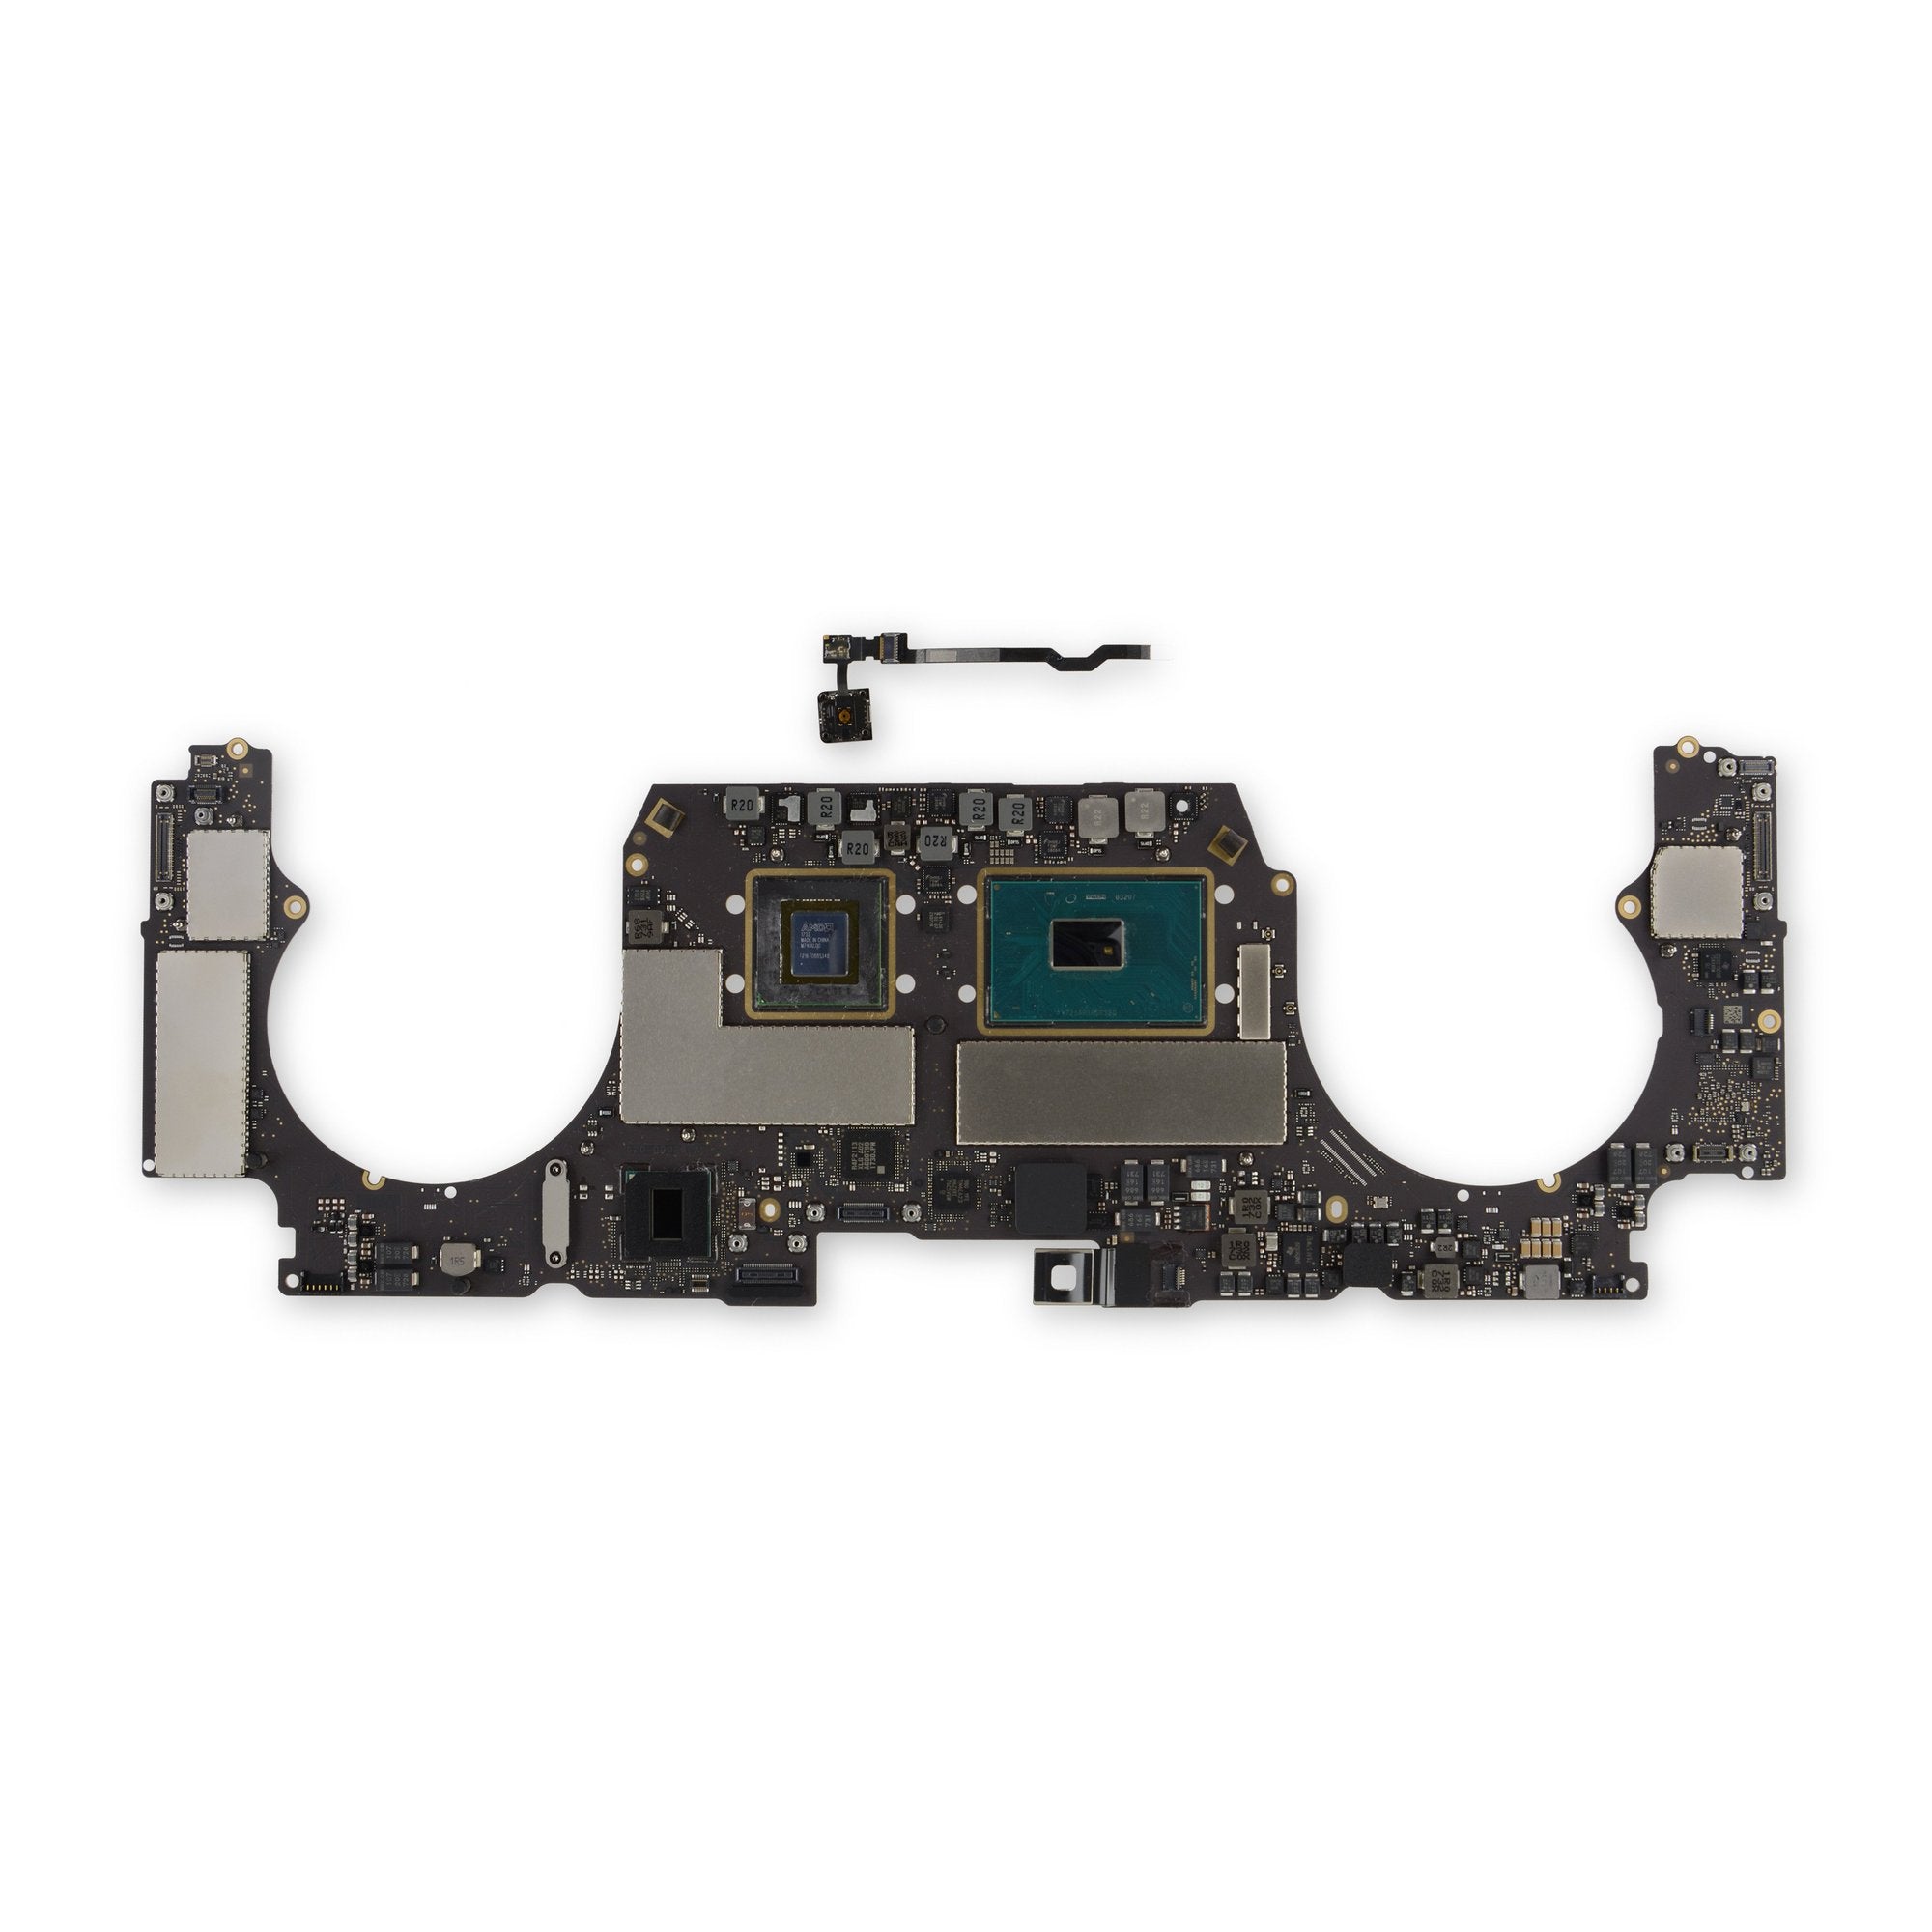 MacBook Pro 15" Retina (2017) 3.1 GHz Logic Board, Radeon Pro 560, with Paired Touch ID Sensor 512 GB Used